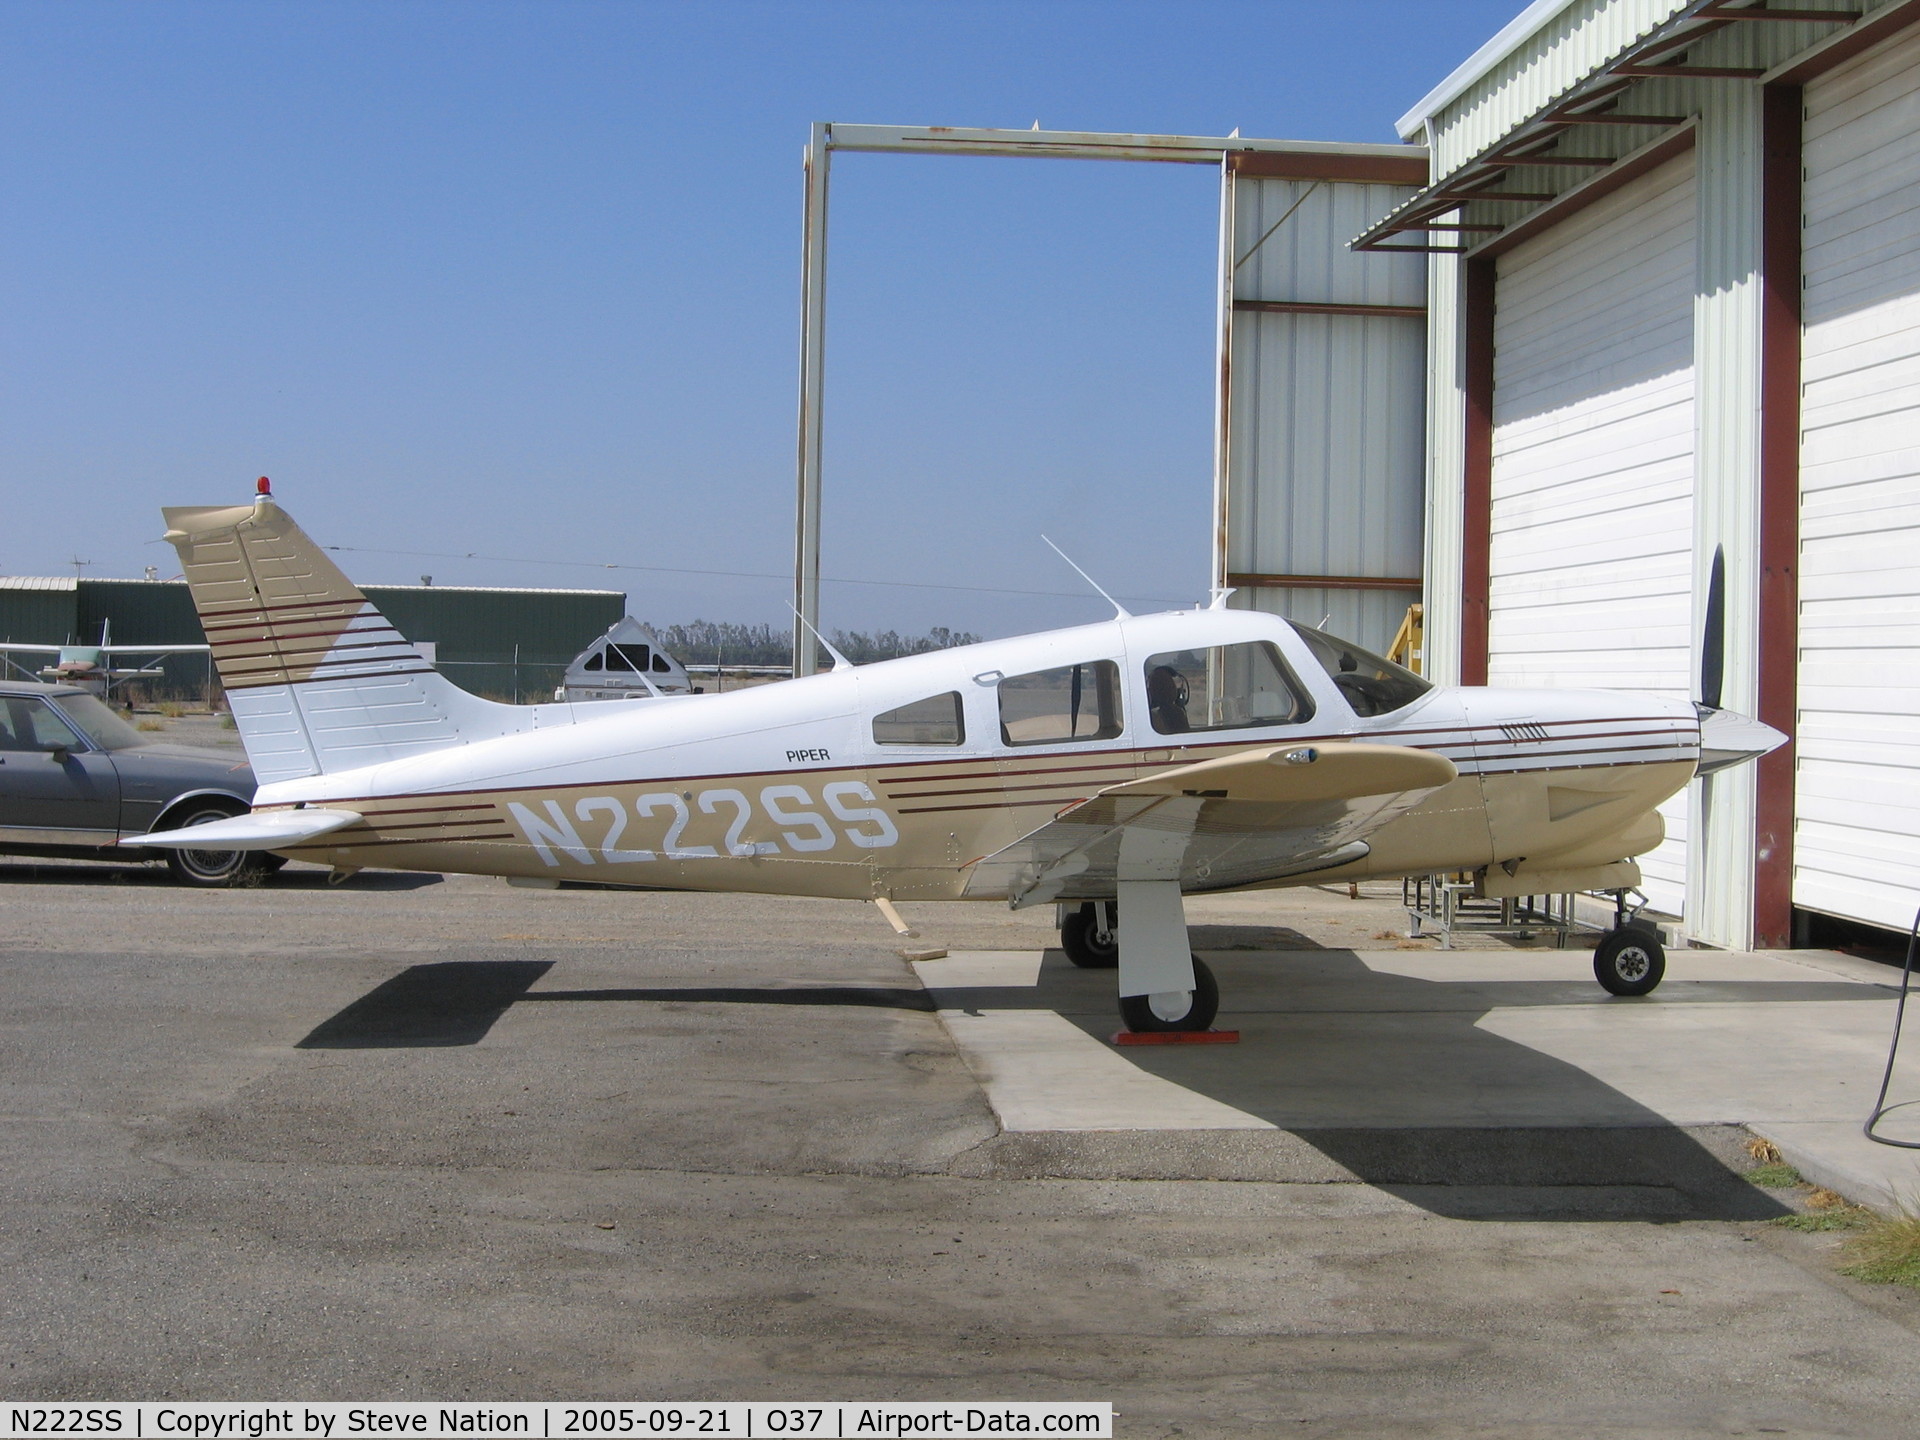 N222SS, 2001 Piper PA-32R-301T Turbo Saratoga C/N 3257260, Newly registered Piper at Haigh Field Airport, Woodland, CA